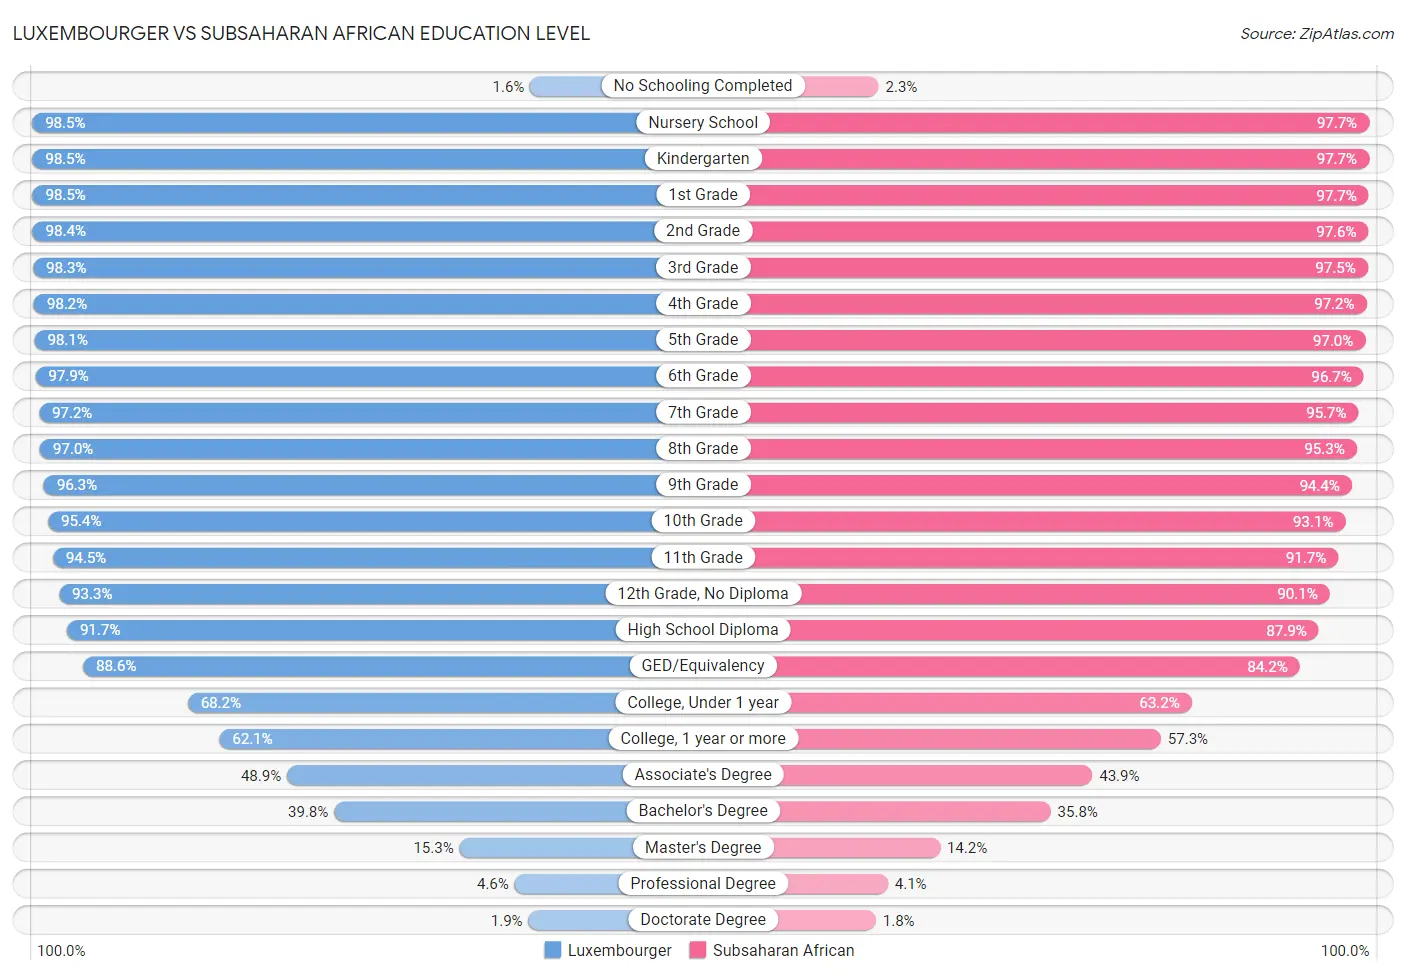 Luxembourger vs Subsaharan African Education Level